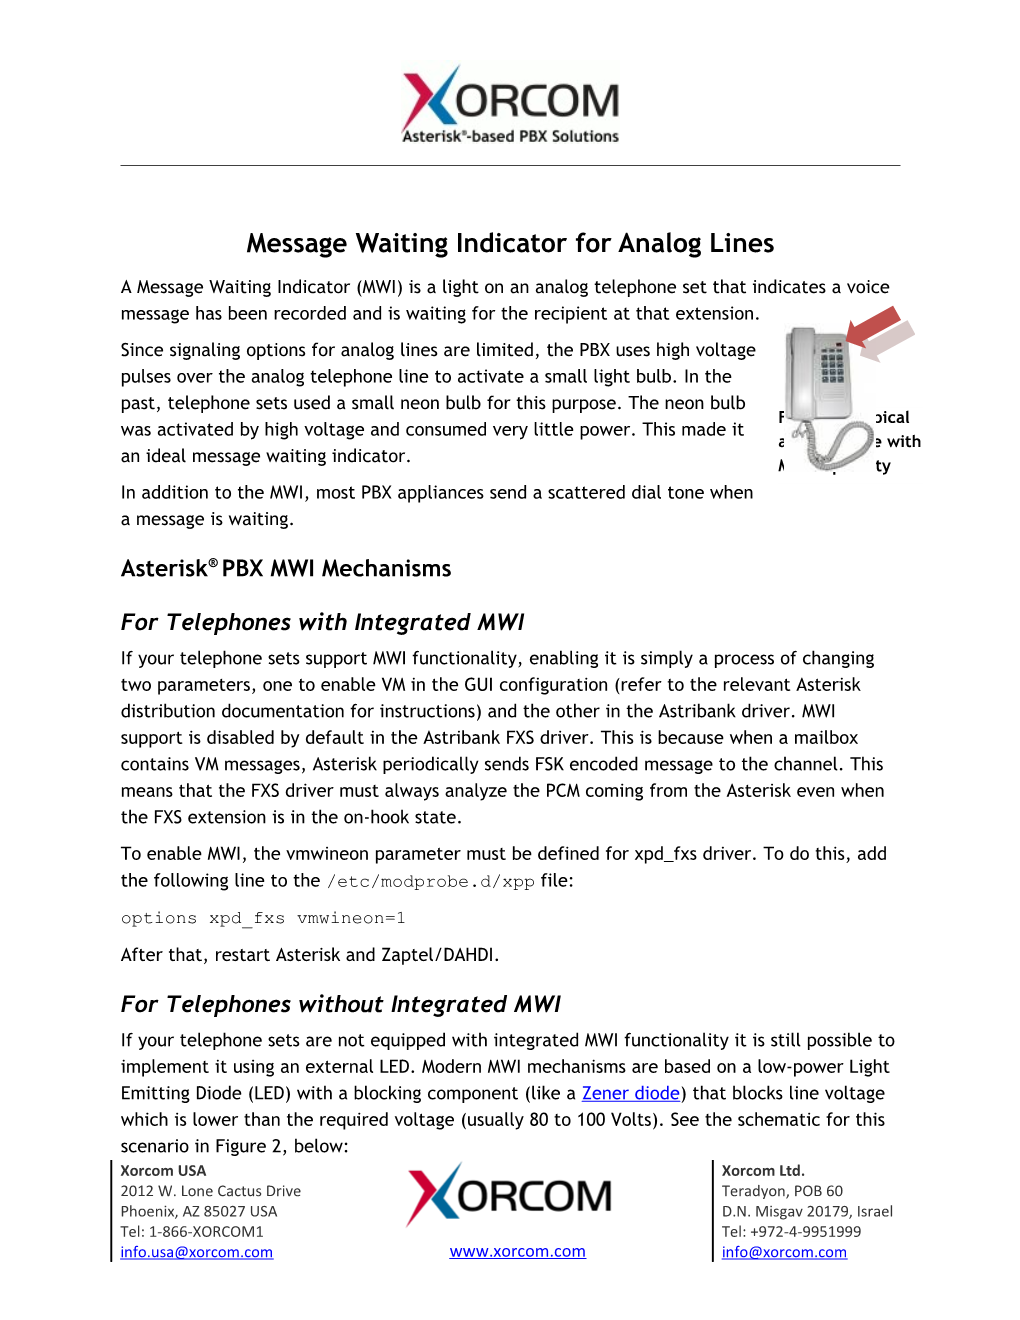 Message Waiting Indicator in Analog Lines Page 2 of 3